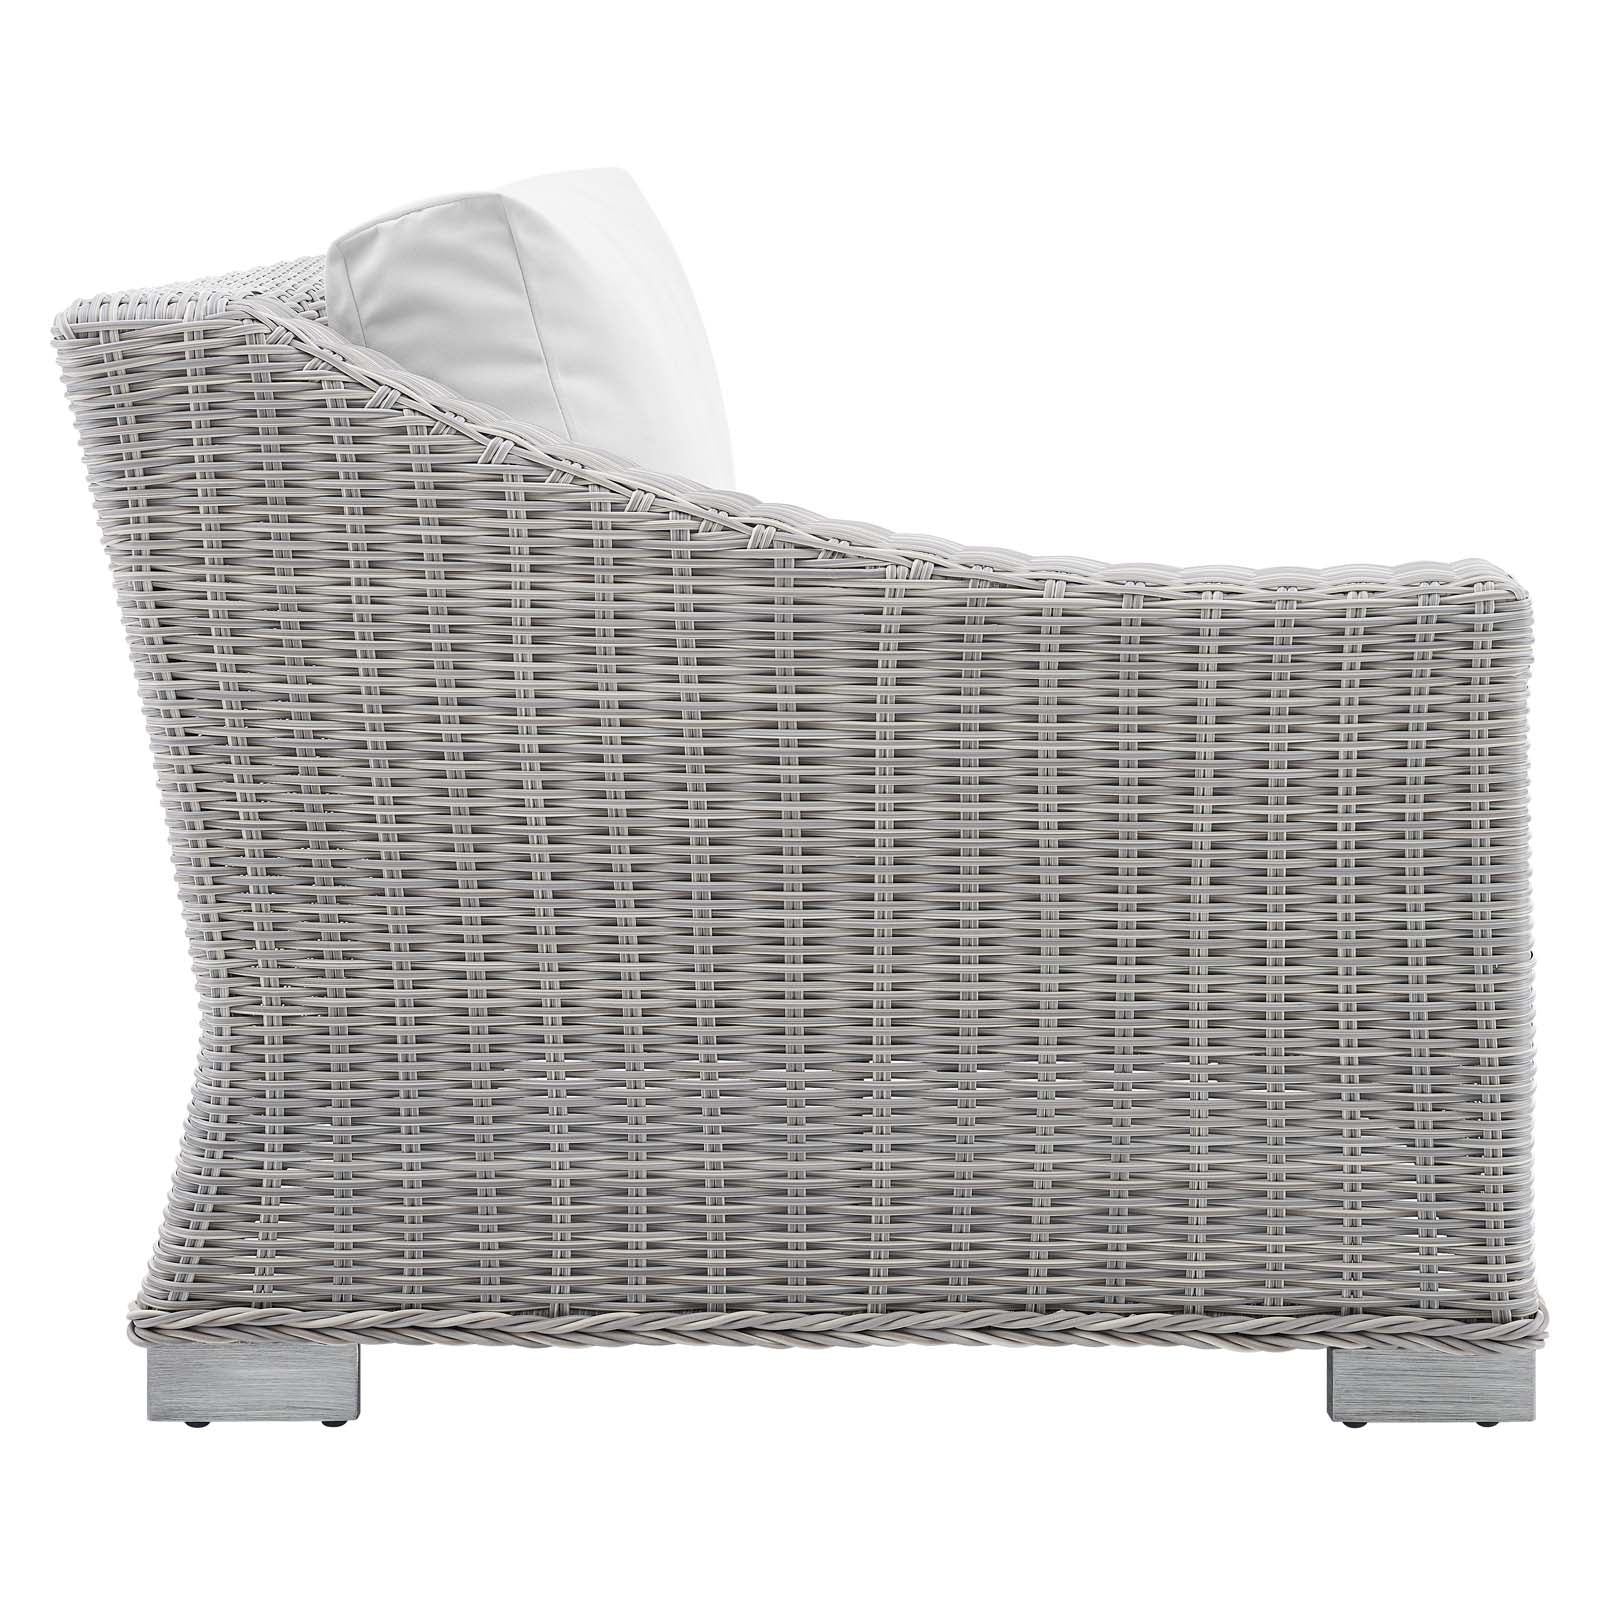 Modway Outdoor Chairs - Conway Sunbrella Outdoor Patio Wicker Rattan Left-Arm Chair Light Gray White